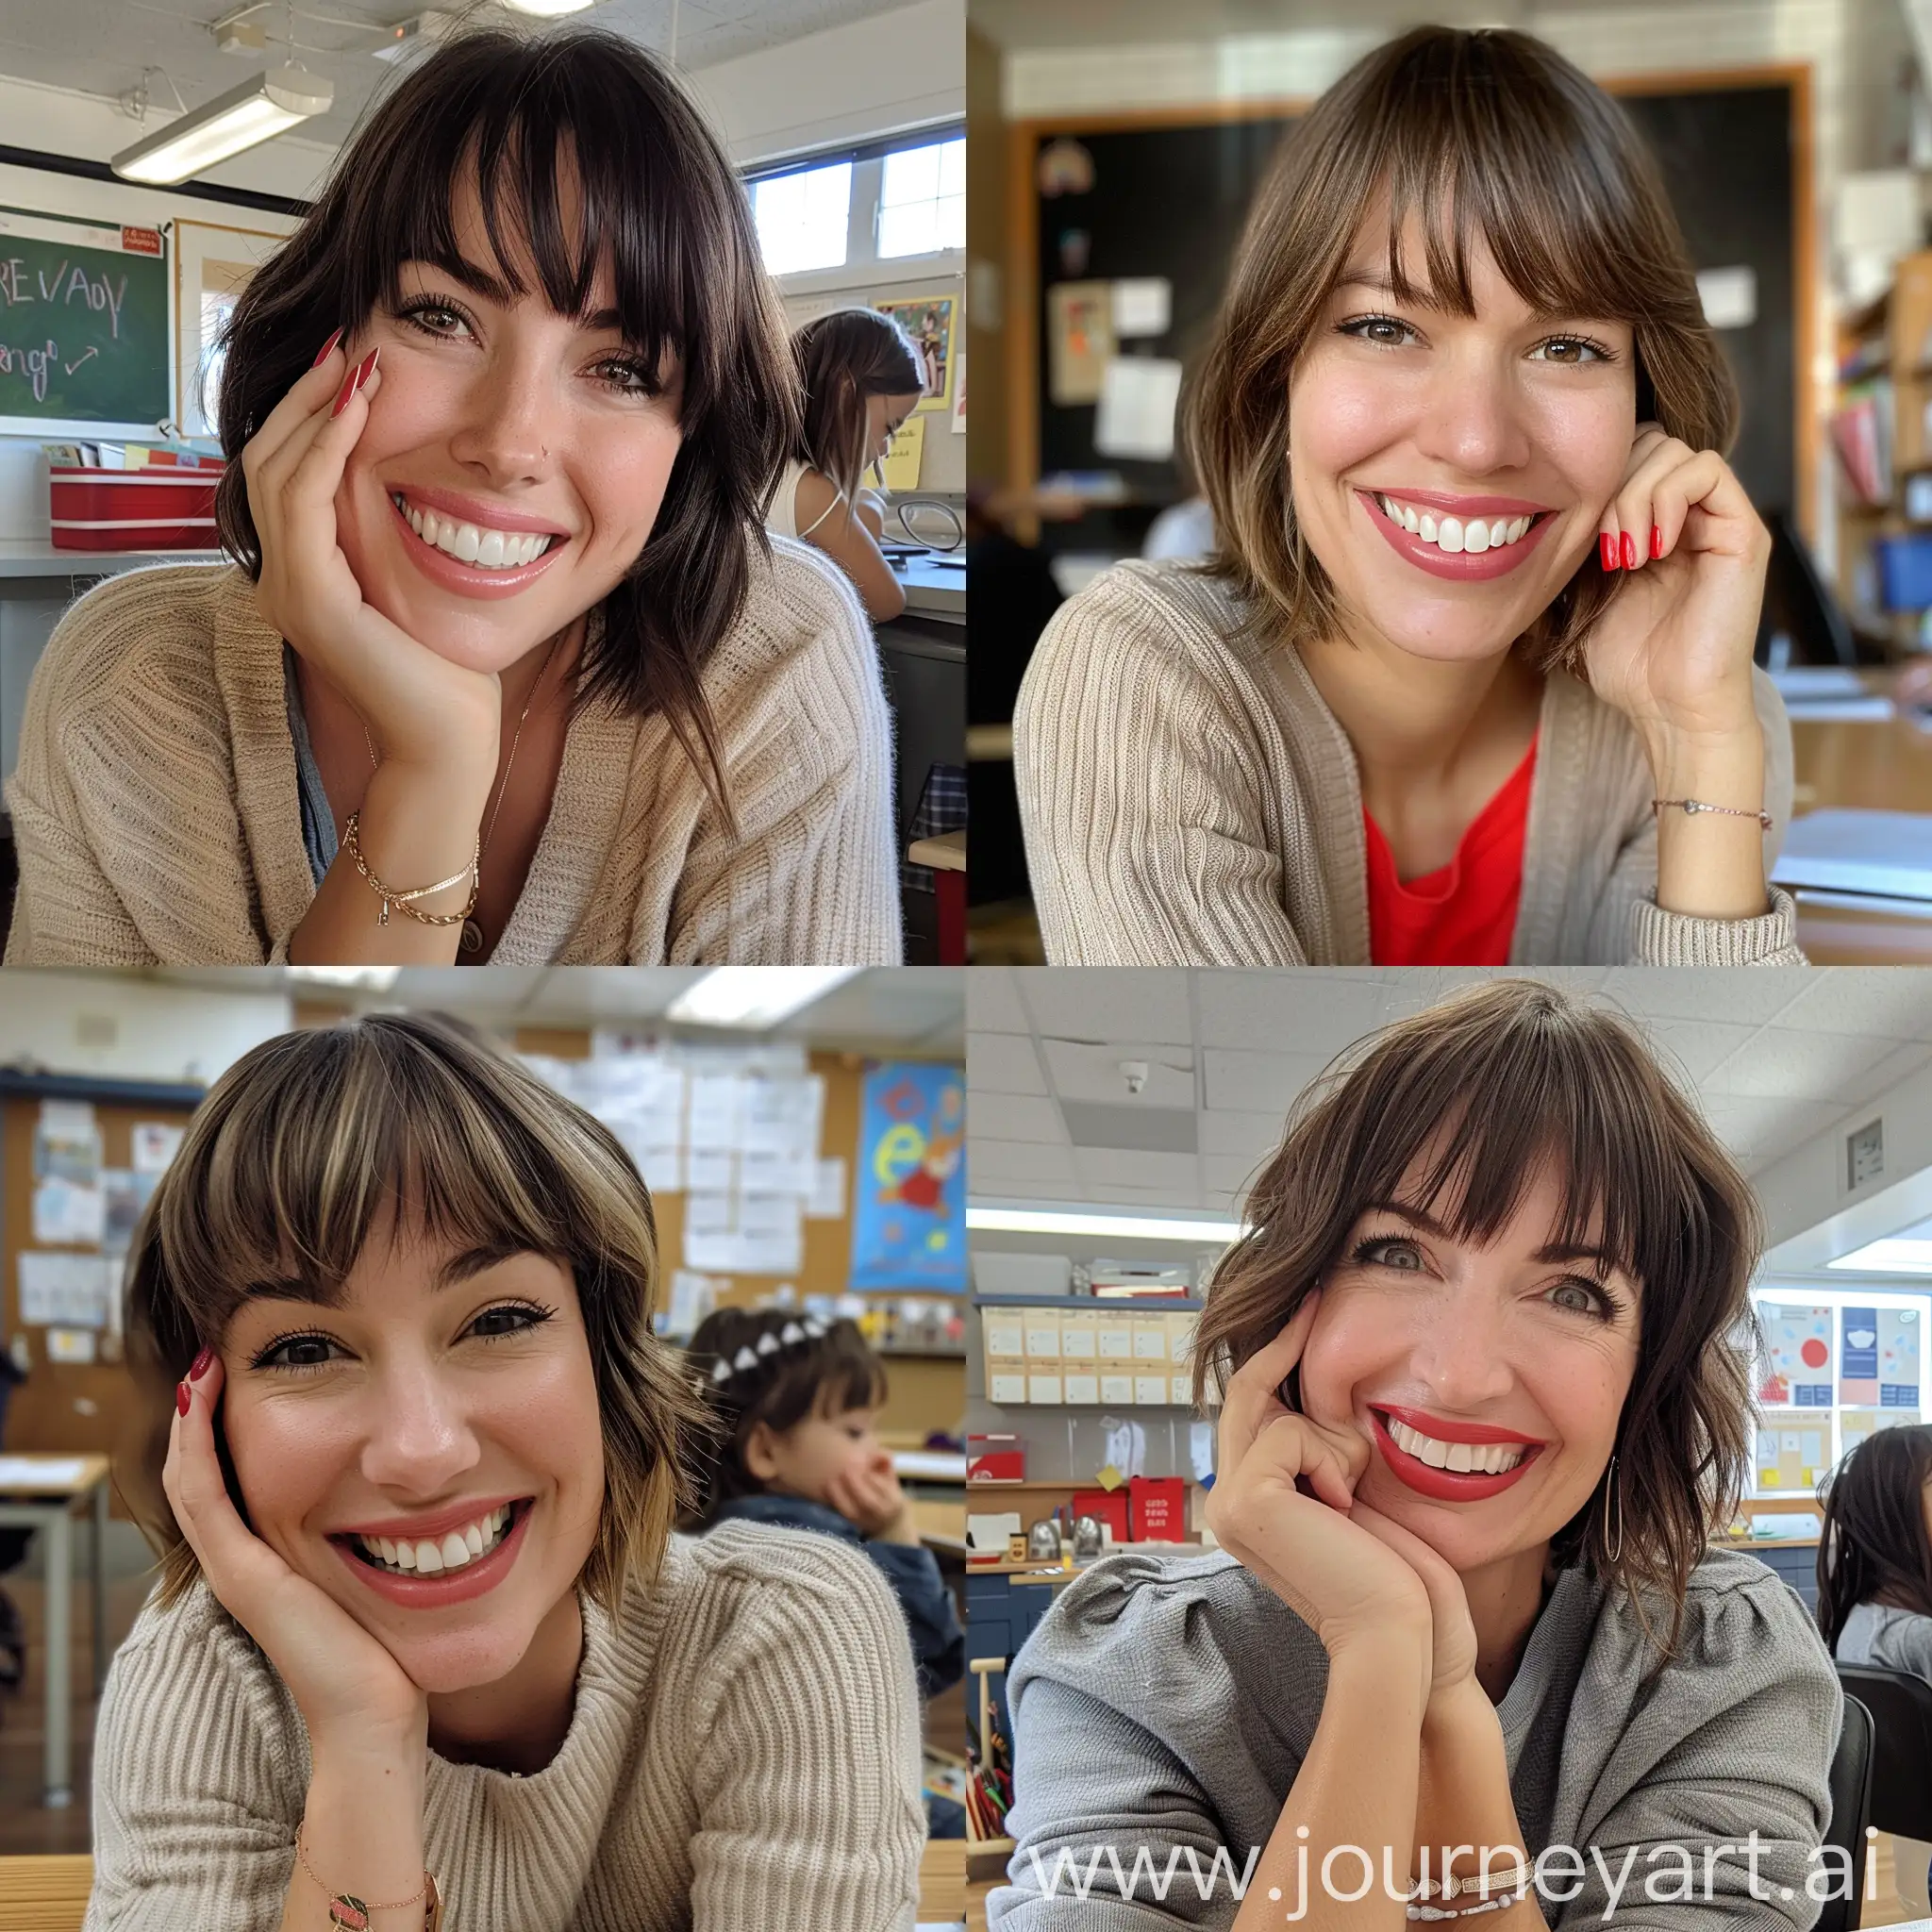 Aesthetic Instagram selfie of a average elementary school teacher, woman, short full hair, bangs, bright smile, perfect teeth, at her desk, one hand on cheek, red gel nail polish, wedding ring, female student next to her, warm brown tones 